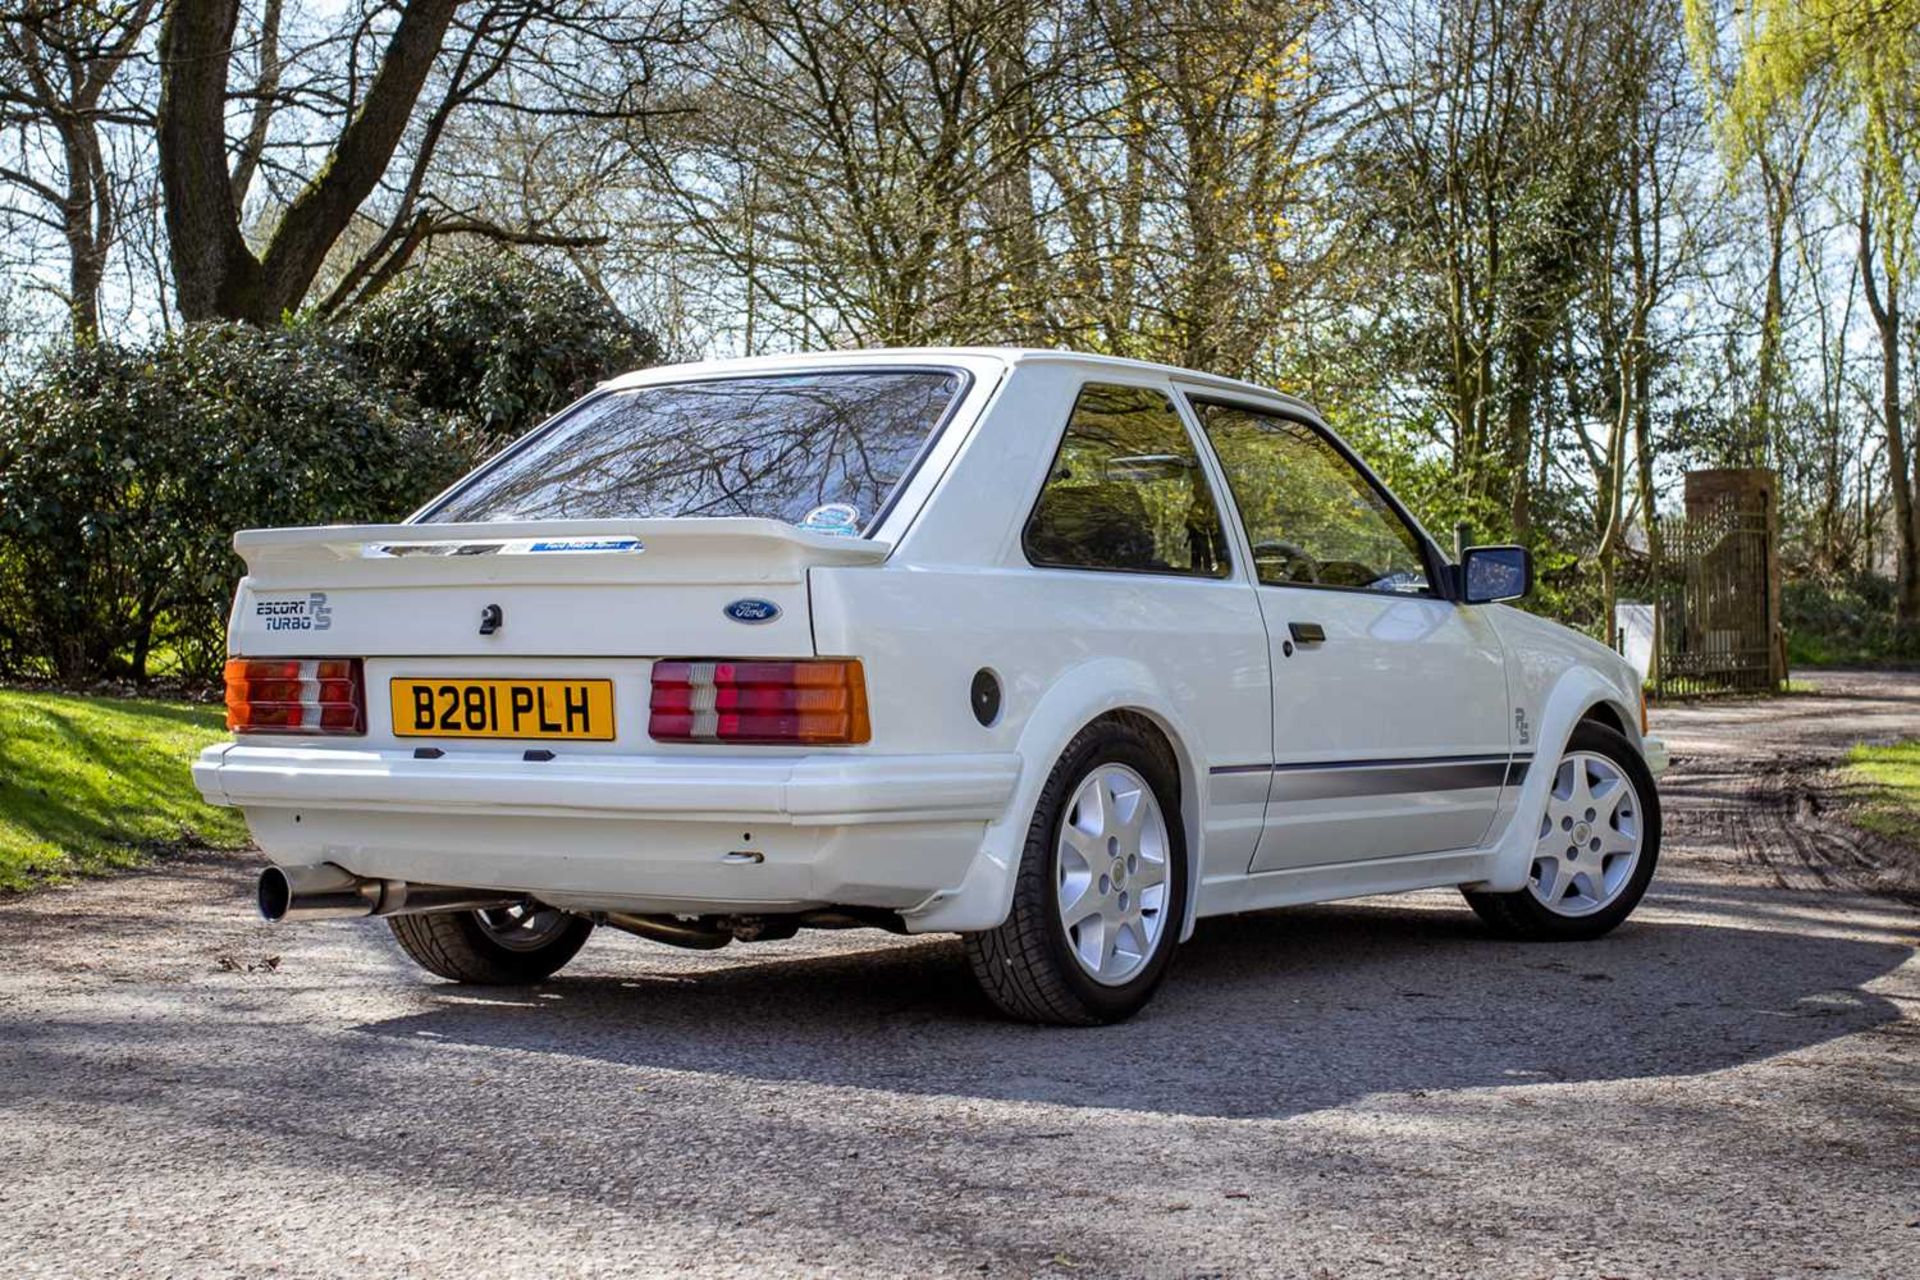 1985 Ford Escort RS Turbo S1 Subject to a full restoration  - Image 10 of 76